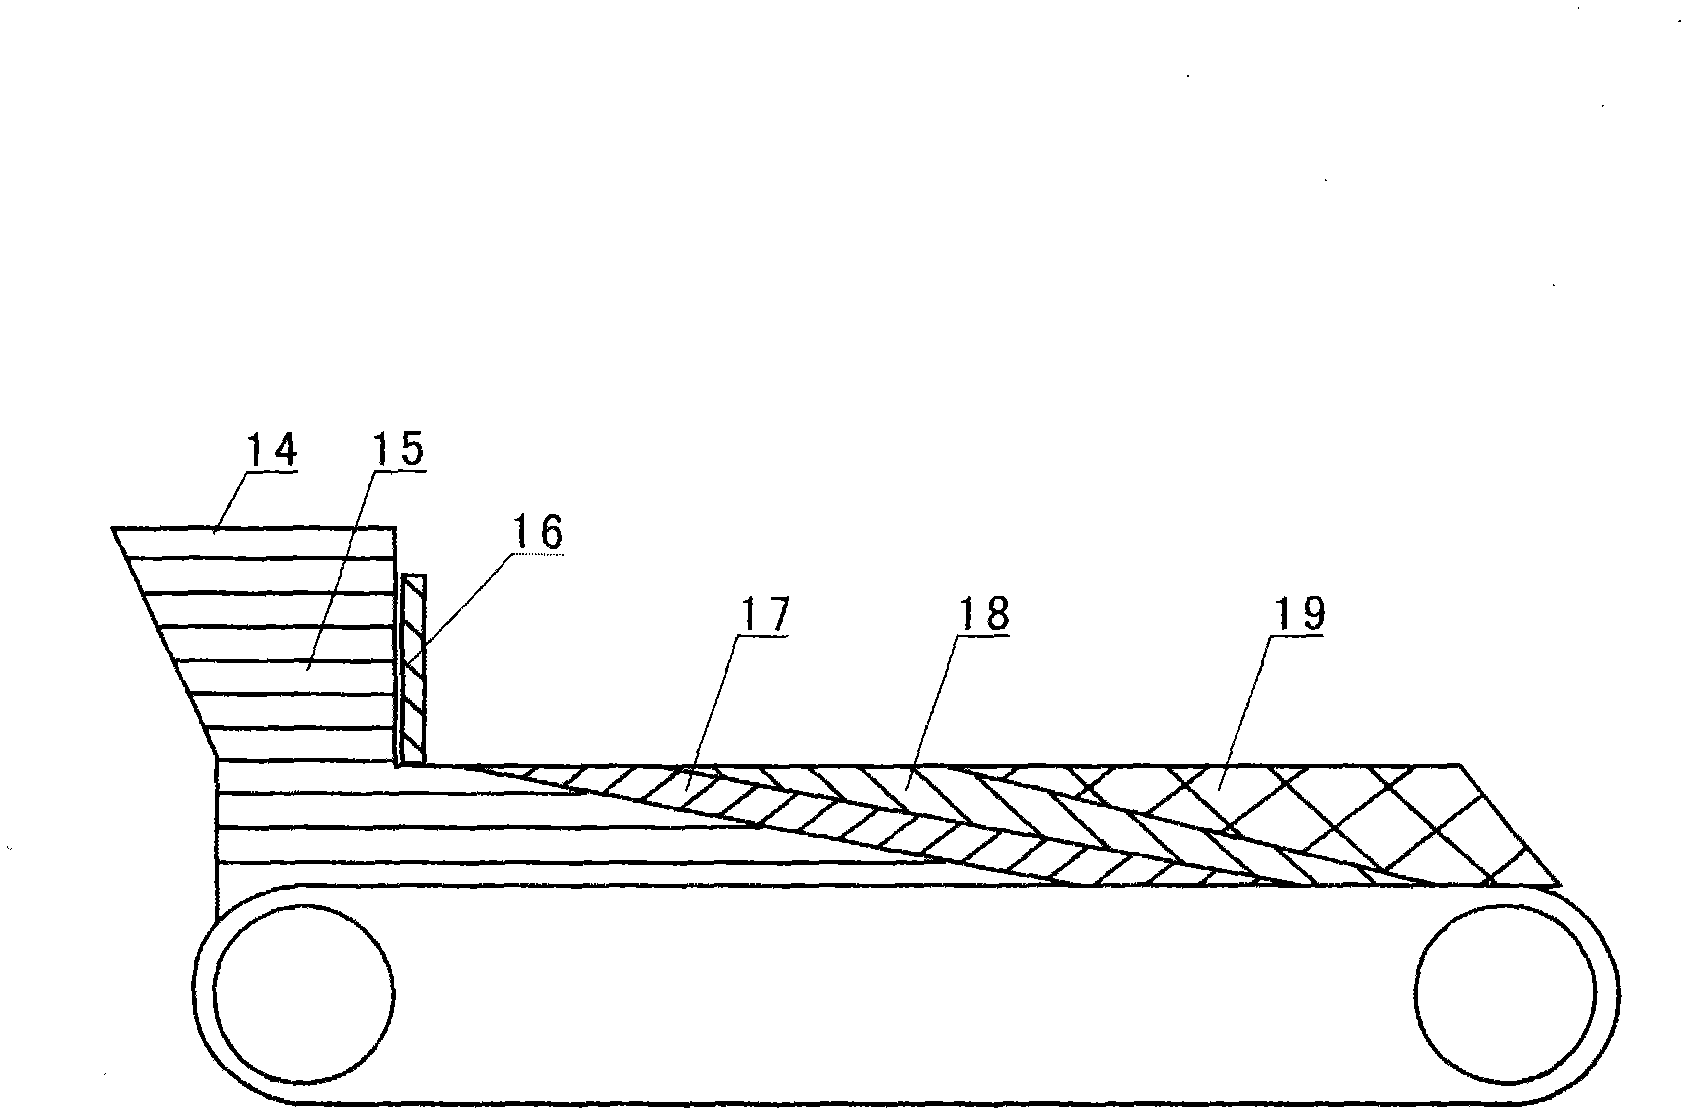 Method for producing metallized pellets by using composite carbon-containing pellets and chain belt type roasting machine